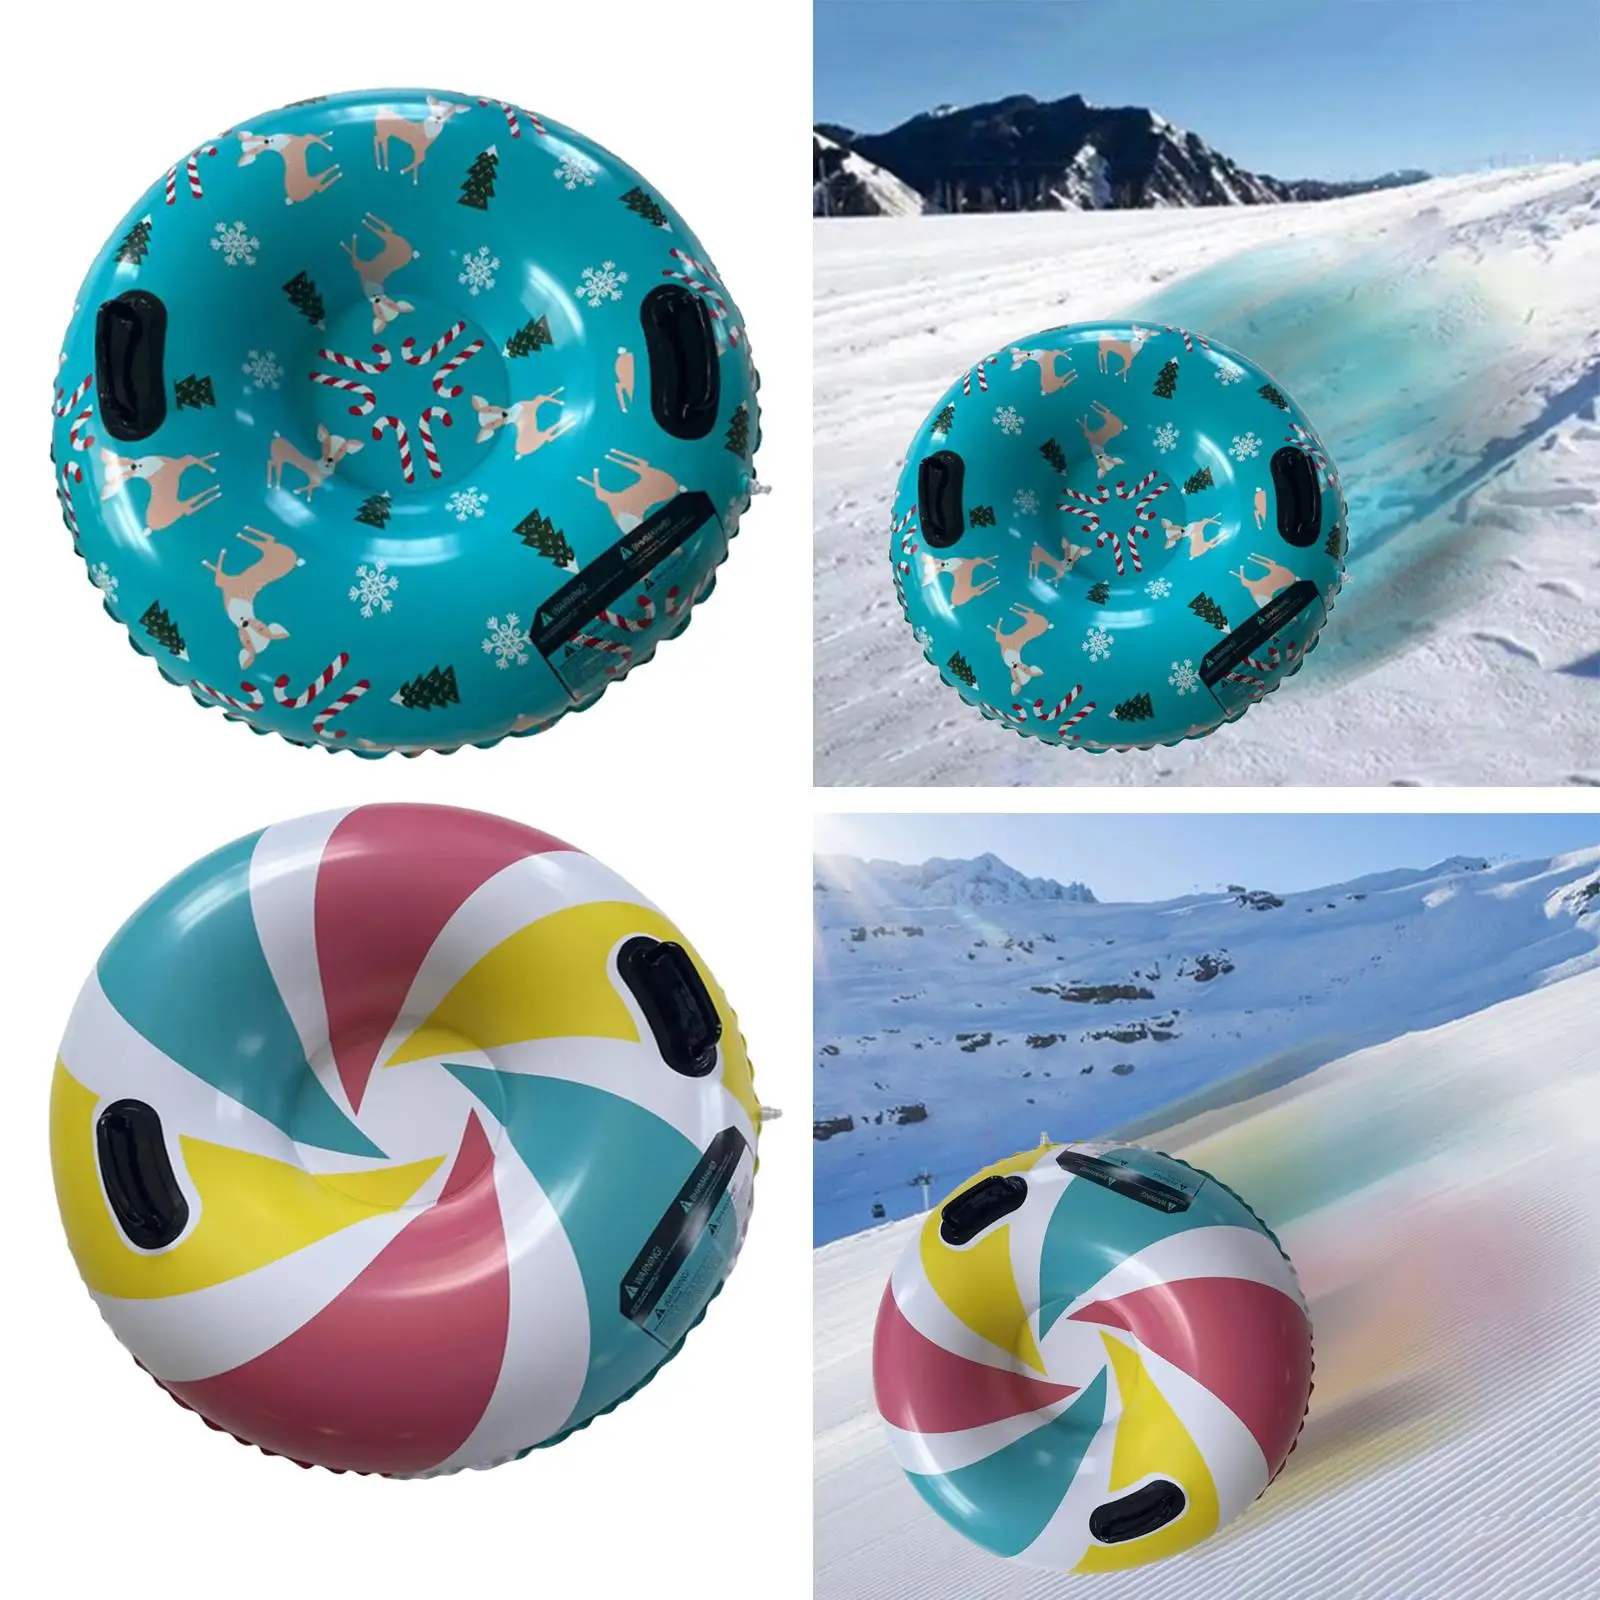 Heavy Duty Winter Snow Tube Easy to Carry Dia 91 Snow Toys with Thickness Bottom Inflatable Sled for Sledding Children Playing